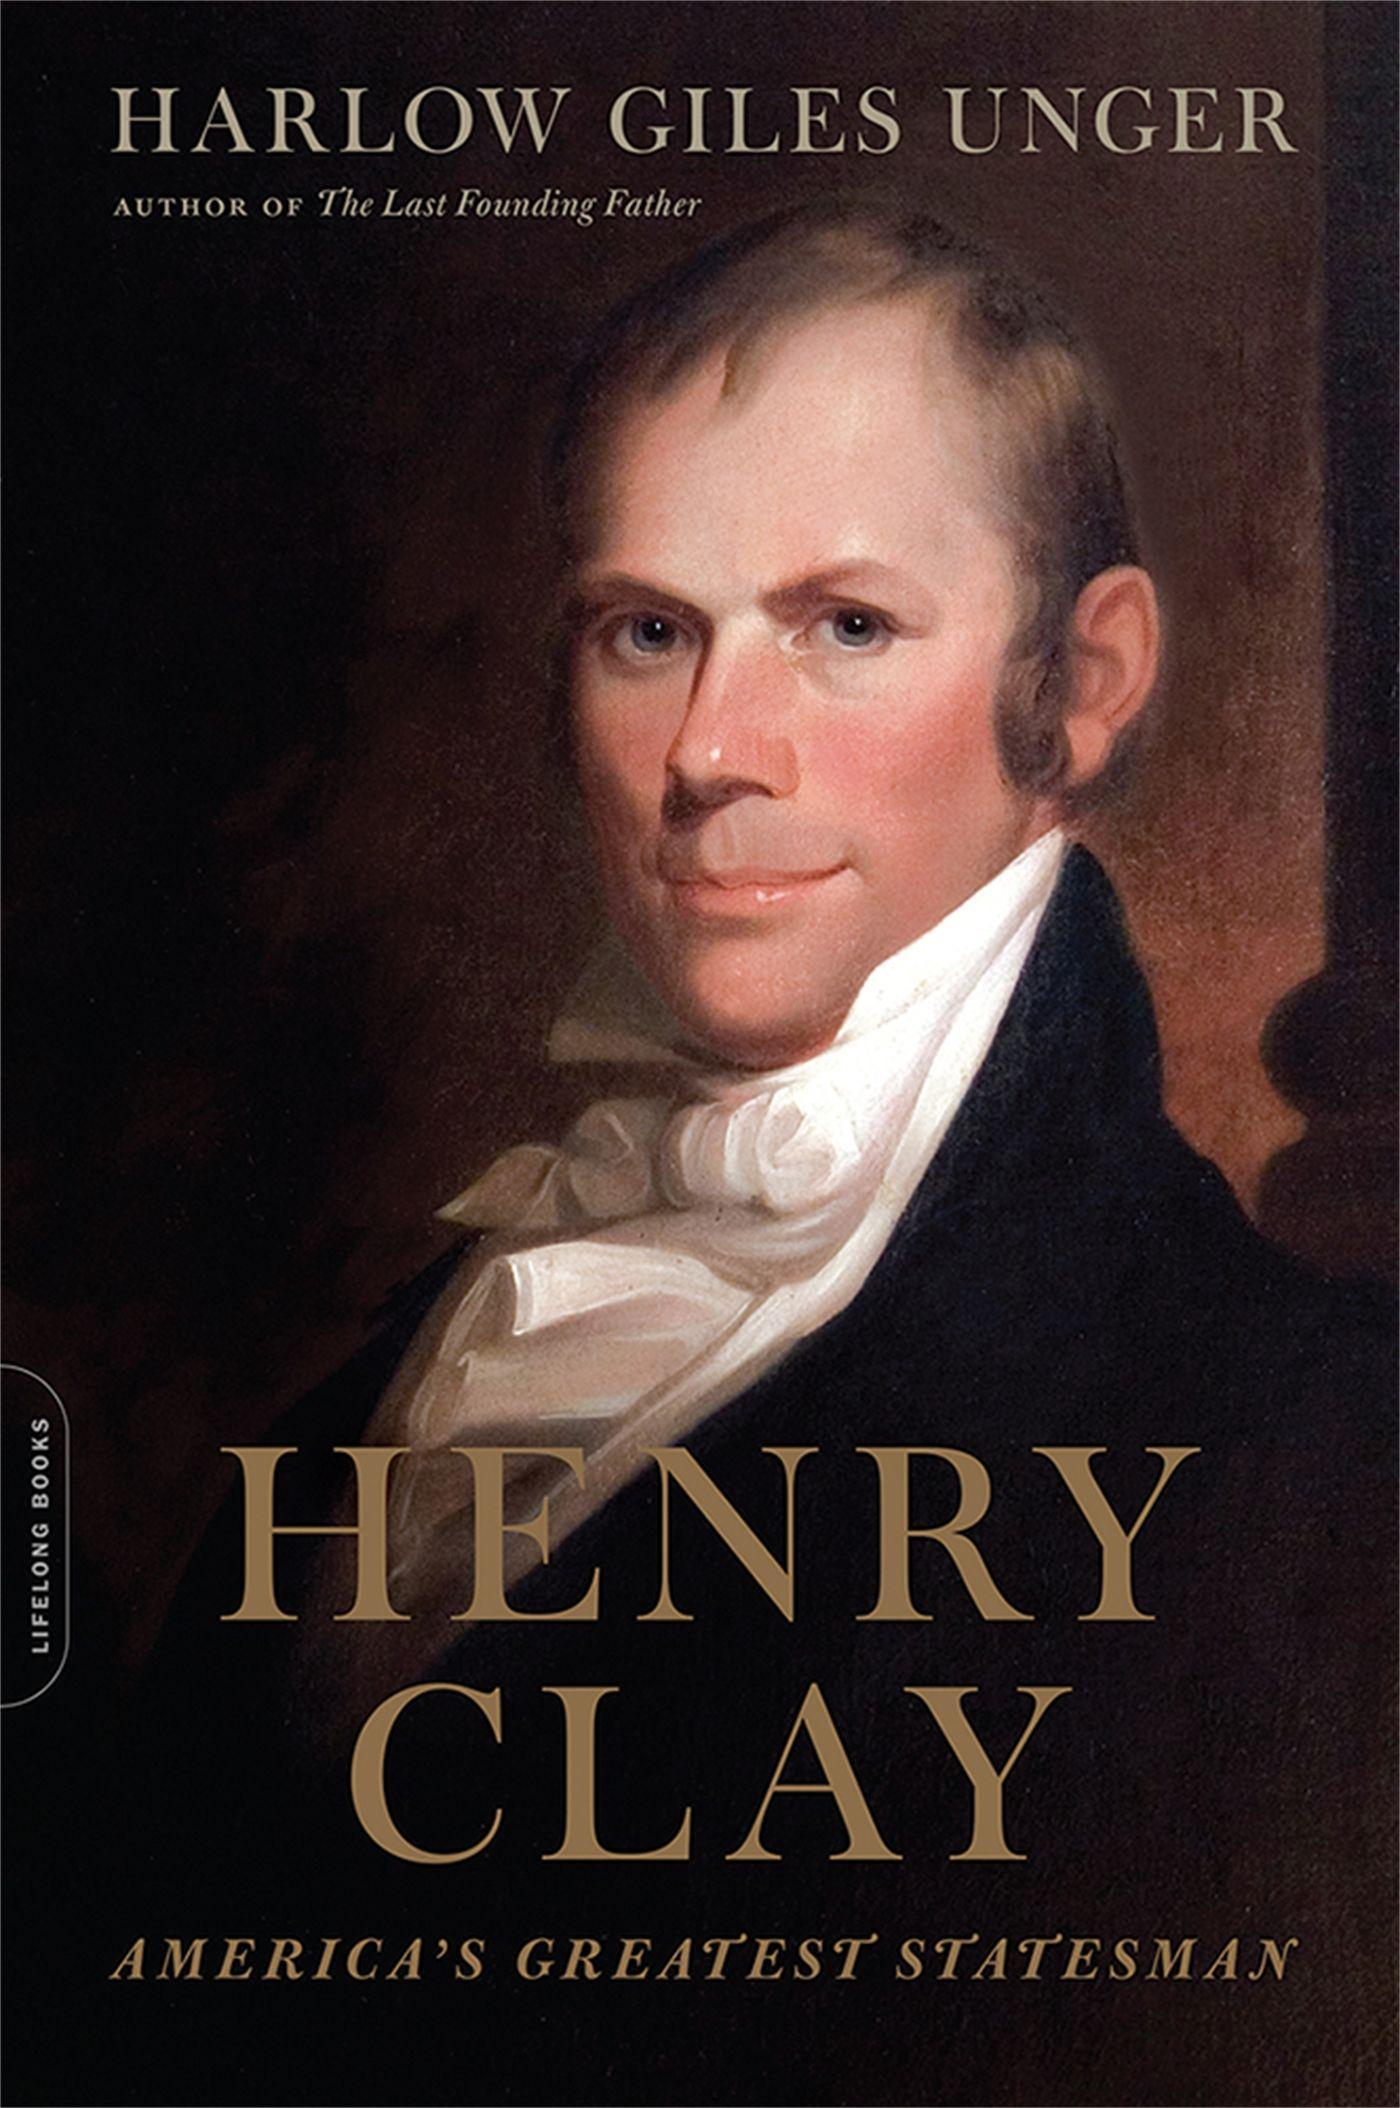 Henry Clay: America s Greatest Statesman - Unger, Harlow Giles